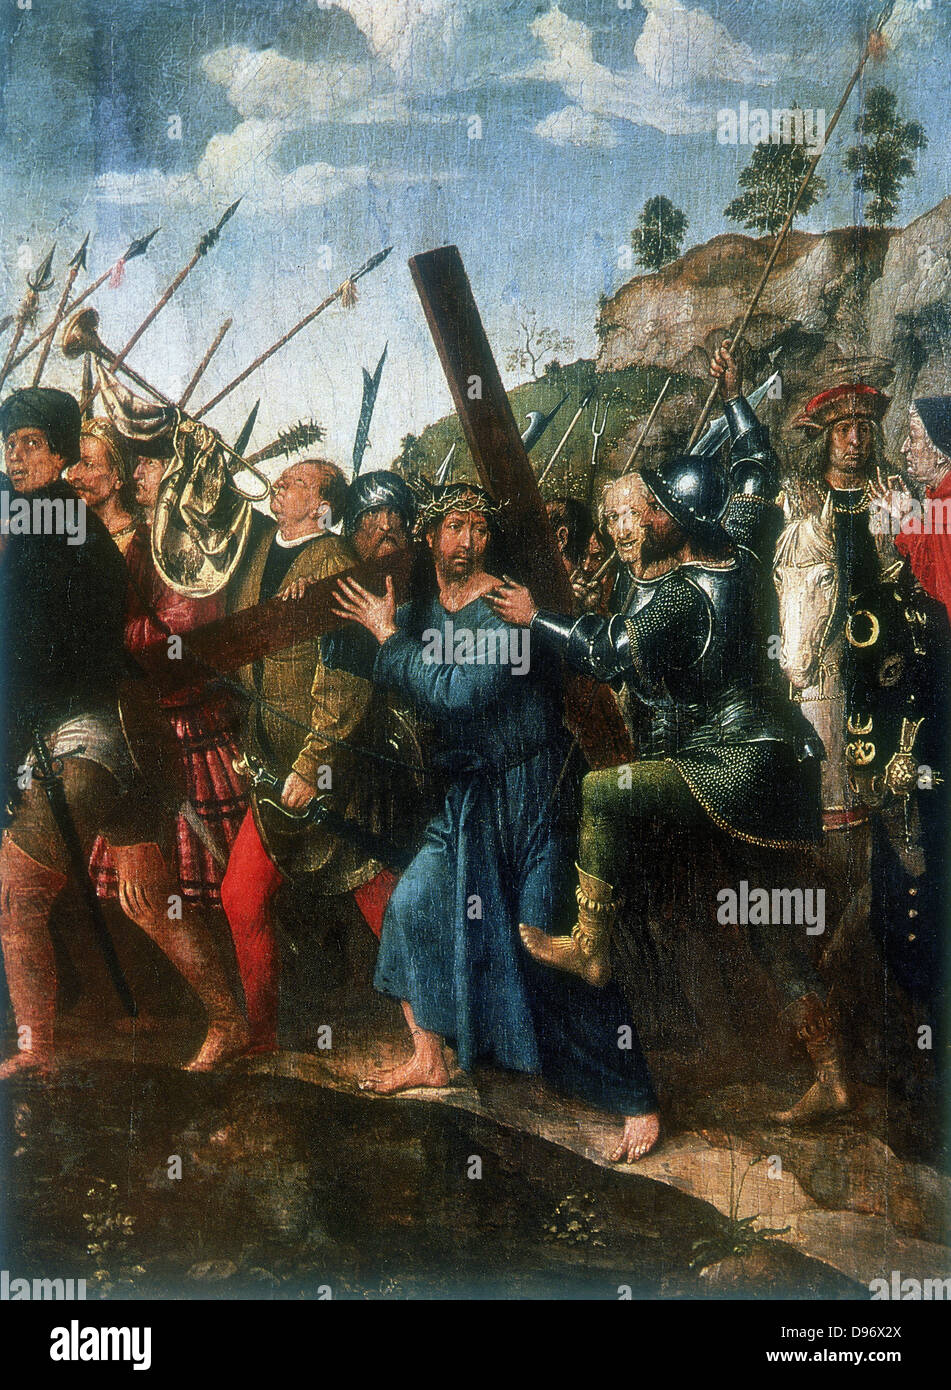 Jesus on the road to Calvary. Jesus, wearing crown of thorns carrying his cross, urged on by soldier. Michiel Sittow (1469-1525). Oil on wood. Stock Photo